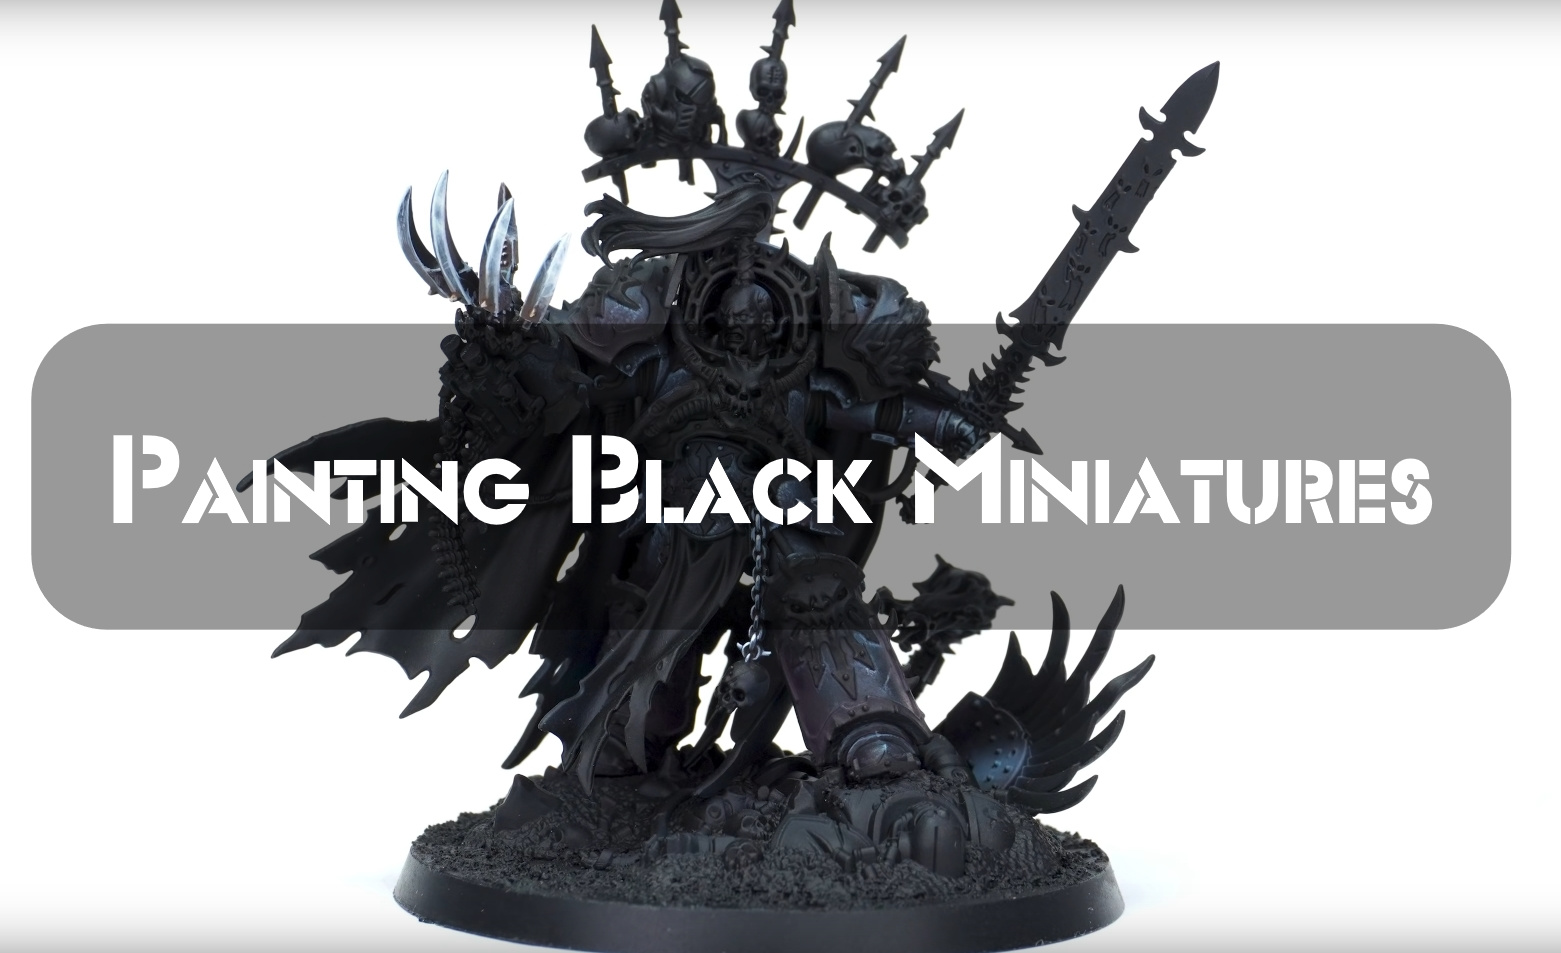 Painting Black Miniatures: A Tutorial and Tips